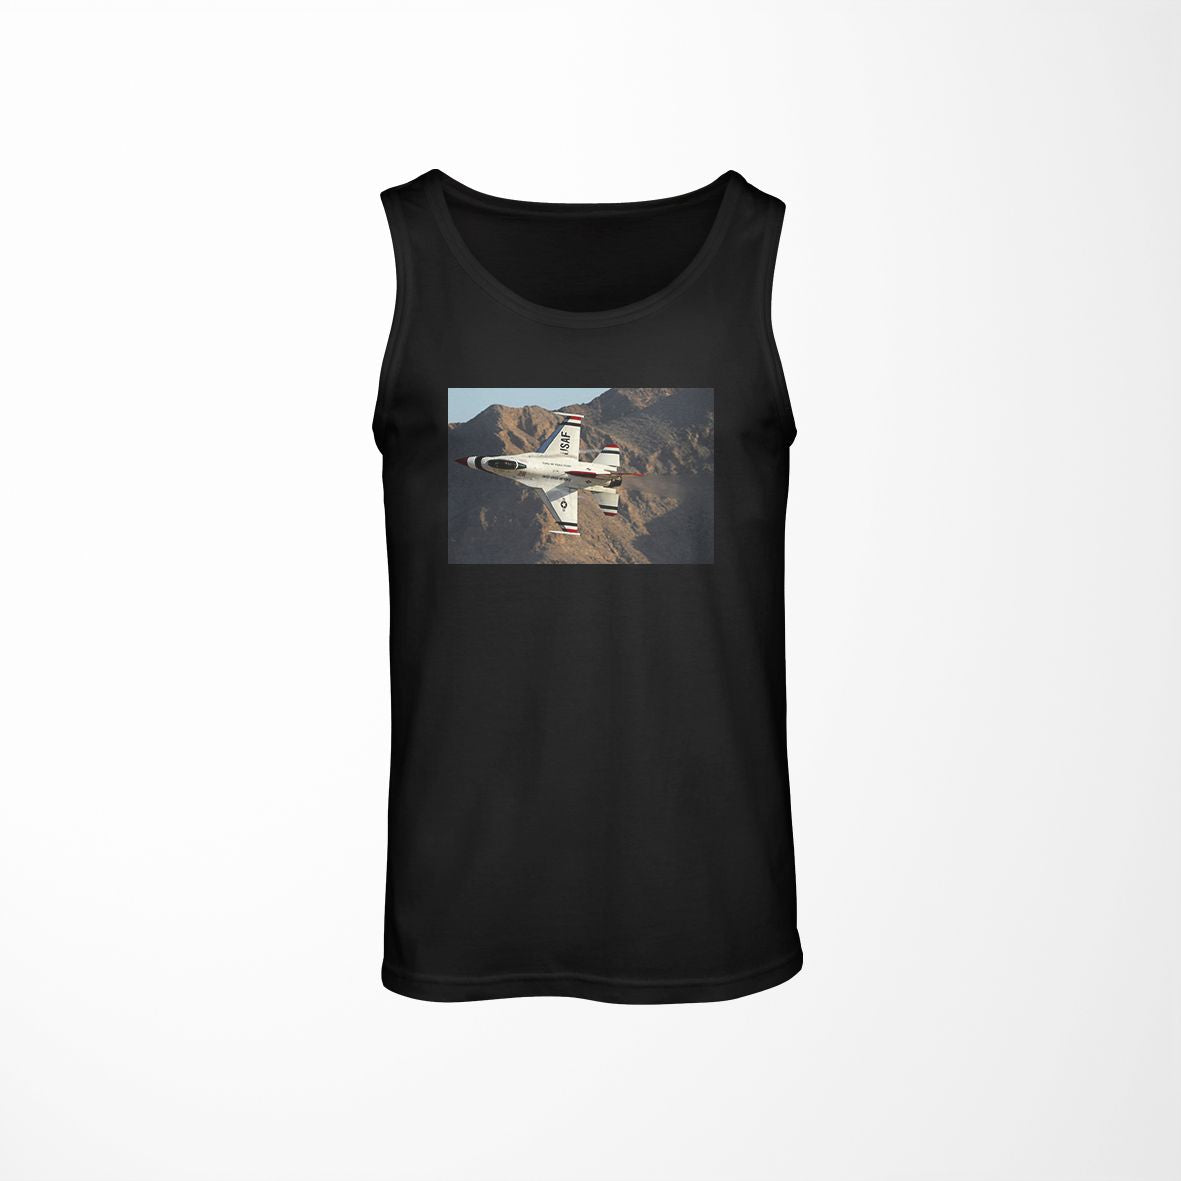 Amazing Show by Fighting Falcon F16 Designed Tank Tops